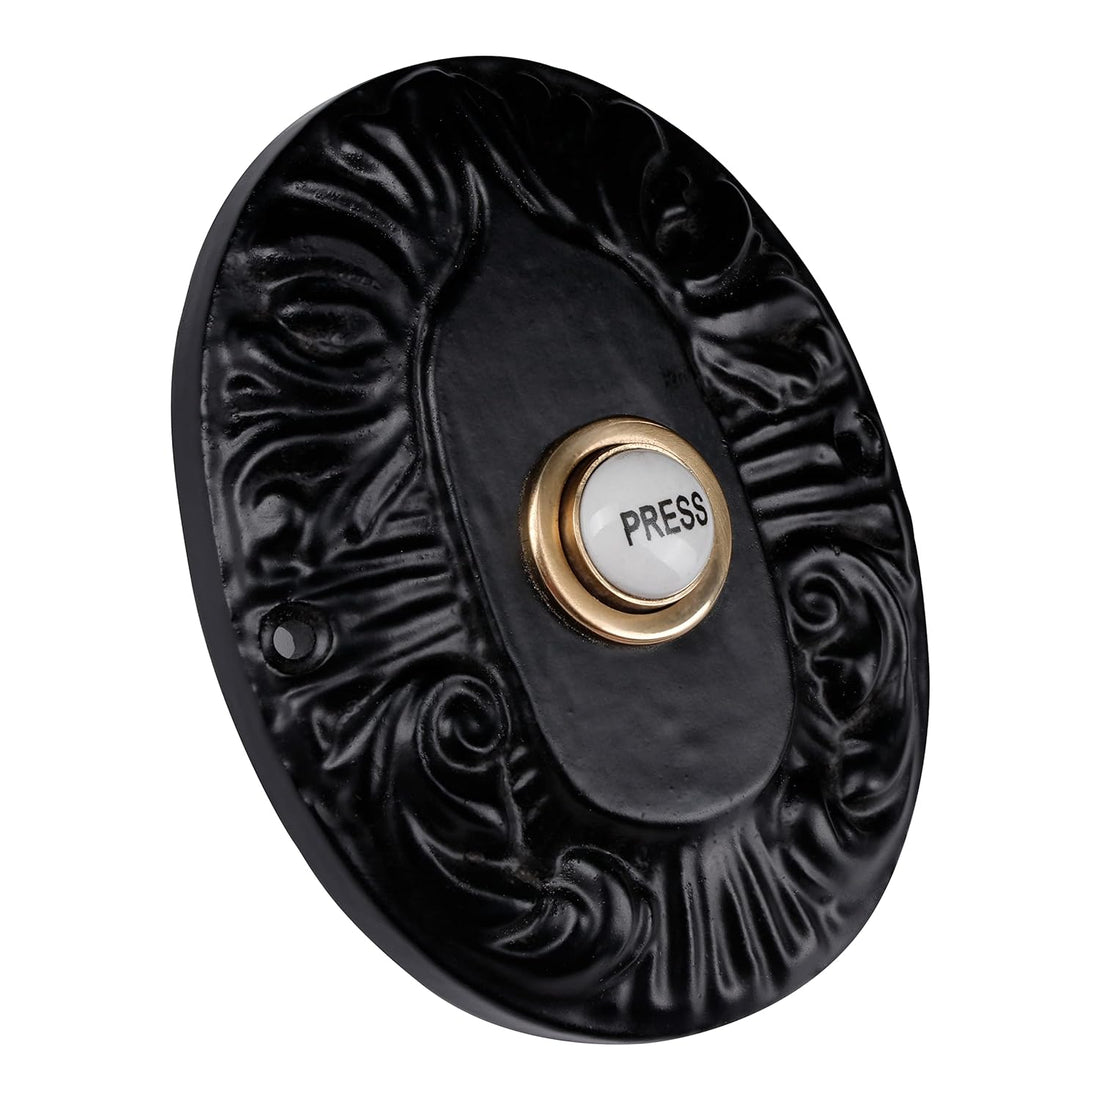 Wired Iron Doorbell Chime with Brass Porcelain Push Button Vintage in Black Powder Coat Finish Decorative Door Bell with Easy Installation, 3 7/8" X 3 1/8"